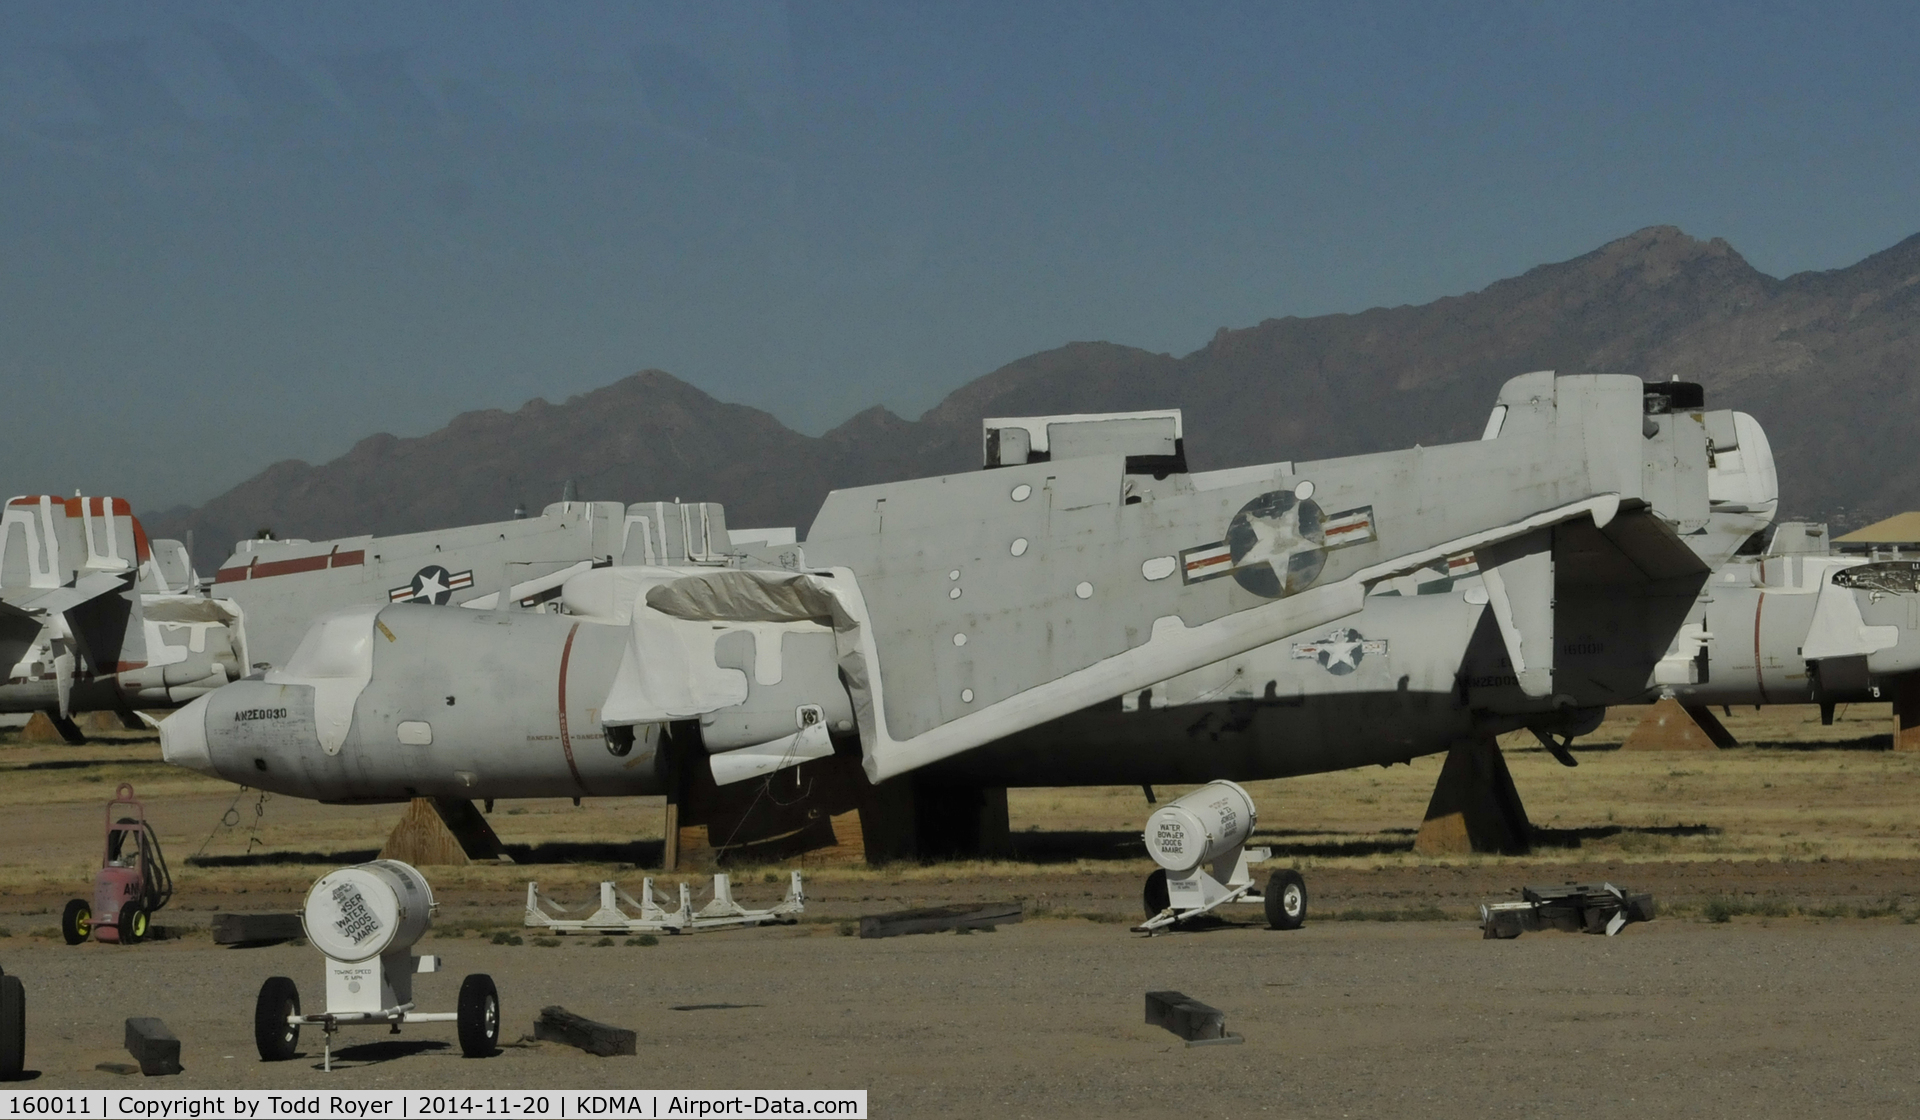 160011, Grumman E-2C Hawkeye C/N A033, Getting parted out at the 